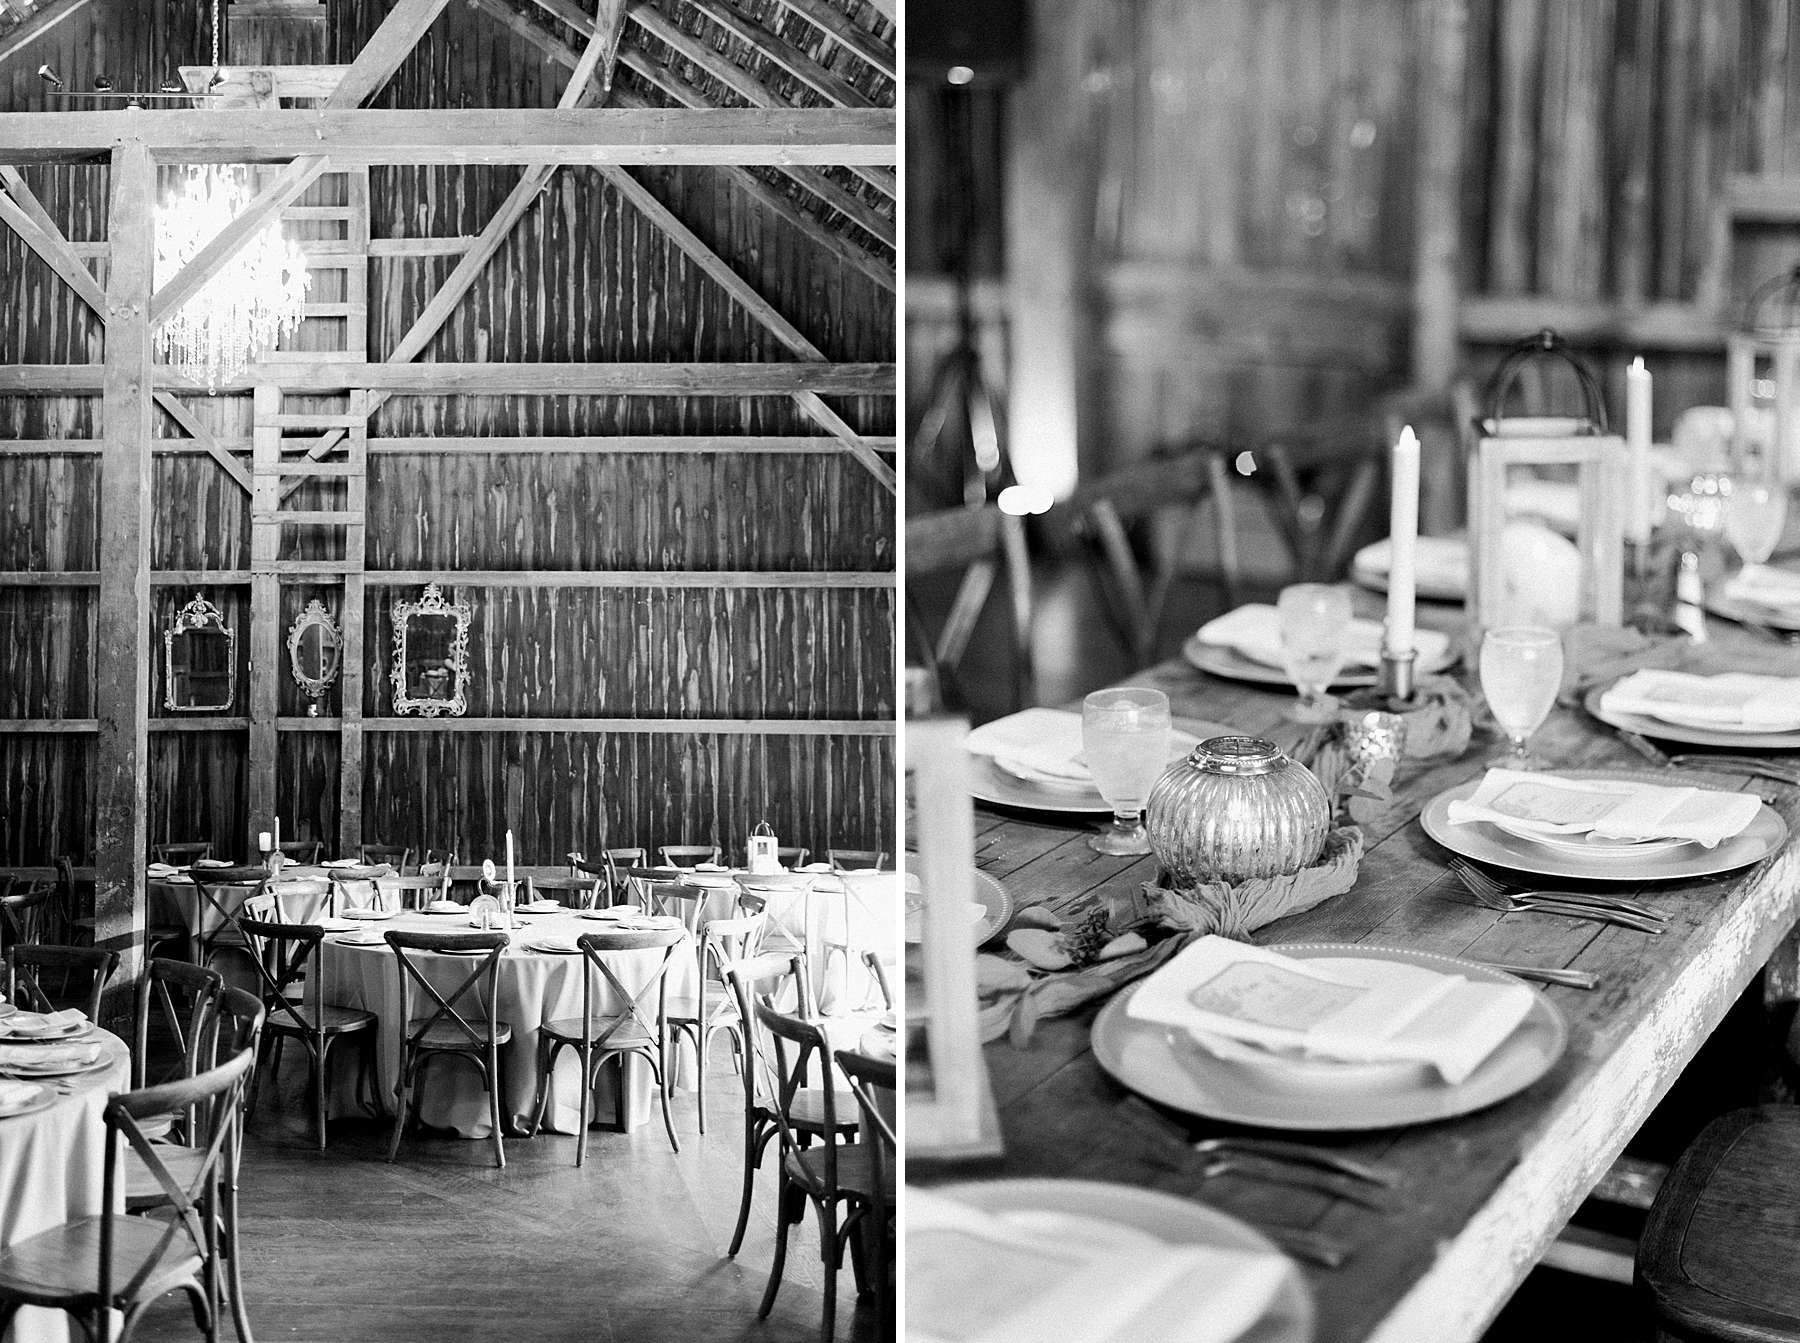 reception, rustic romantic wedding at the landing 1841, photo by laurelyn savannah photography